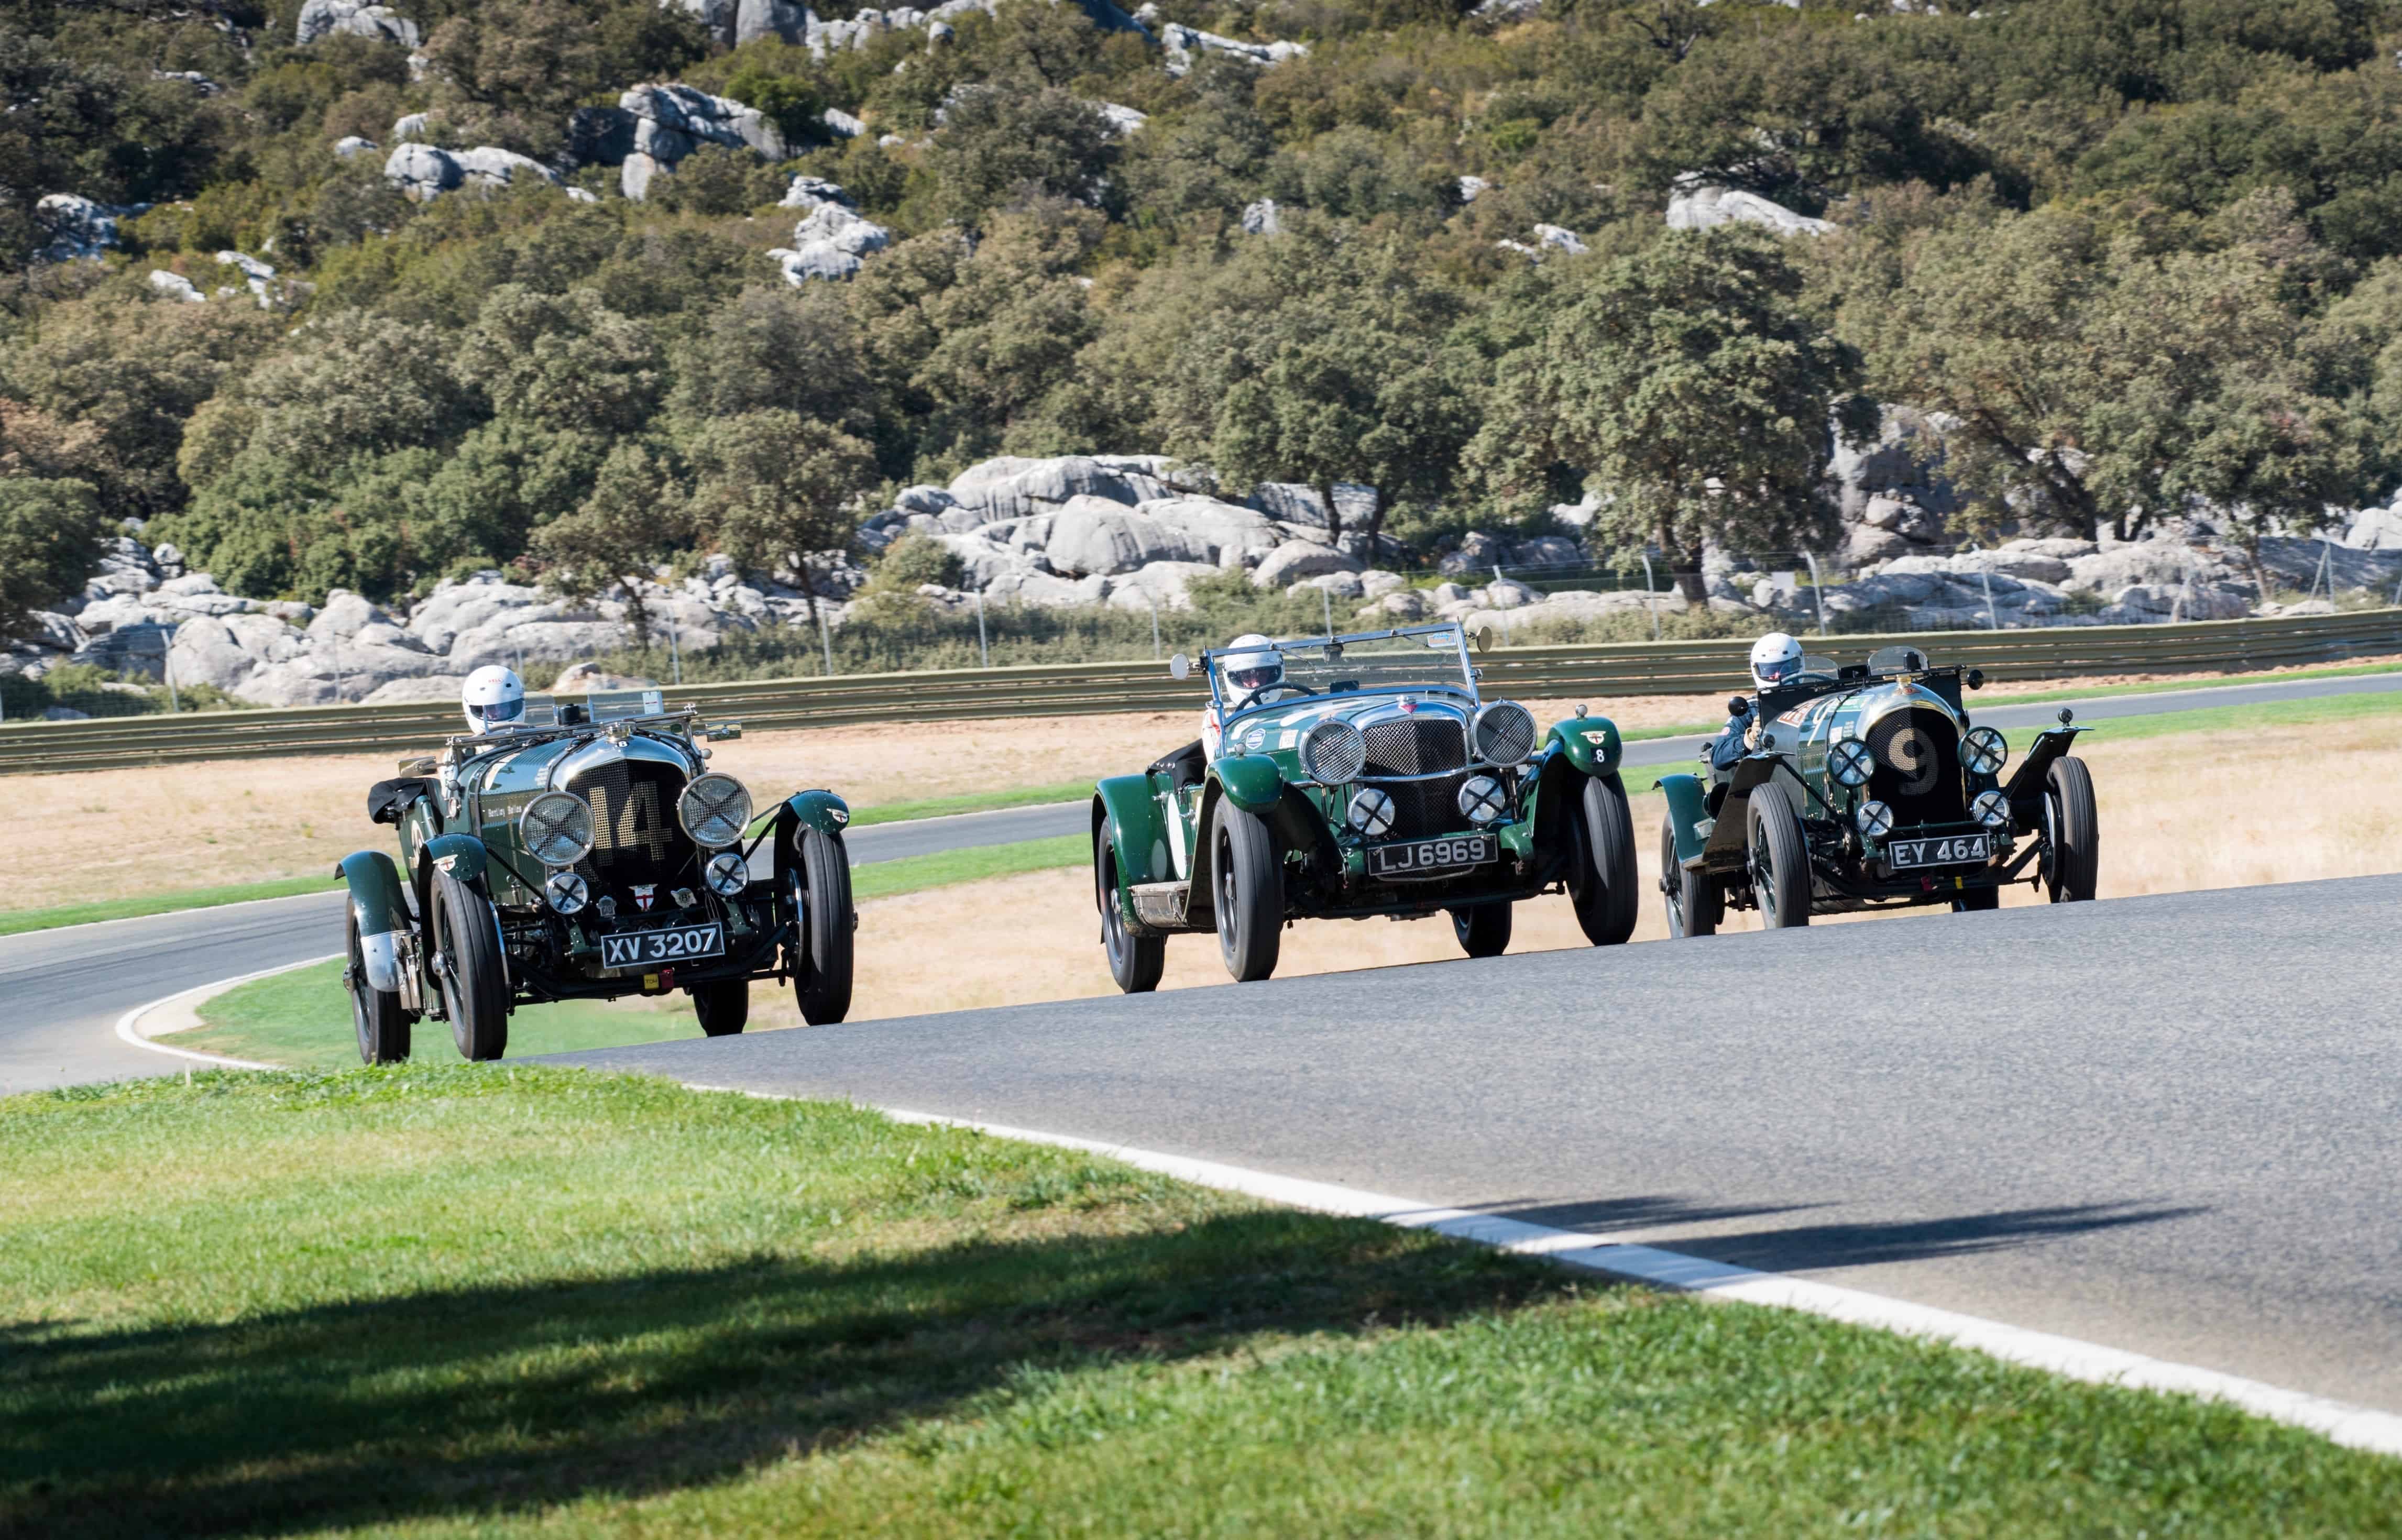 Benjafield’s club revives 500-mile race, but with vintage vehicles